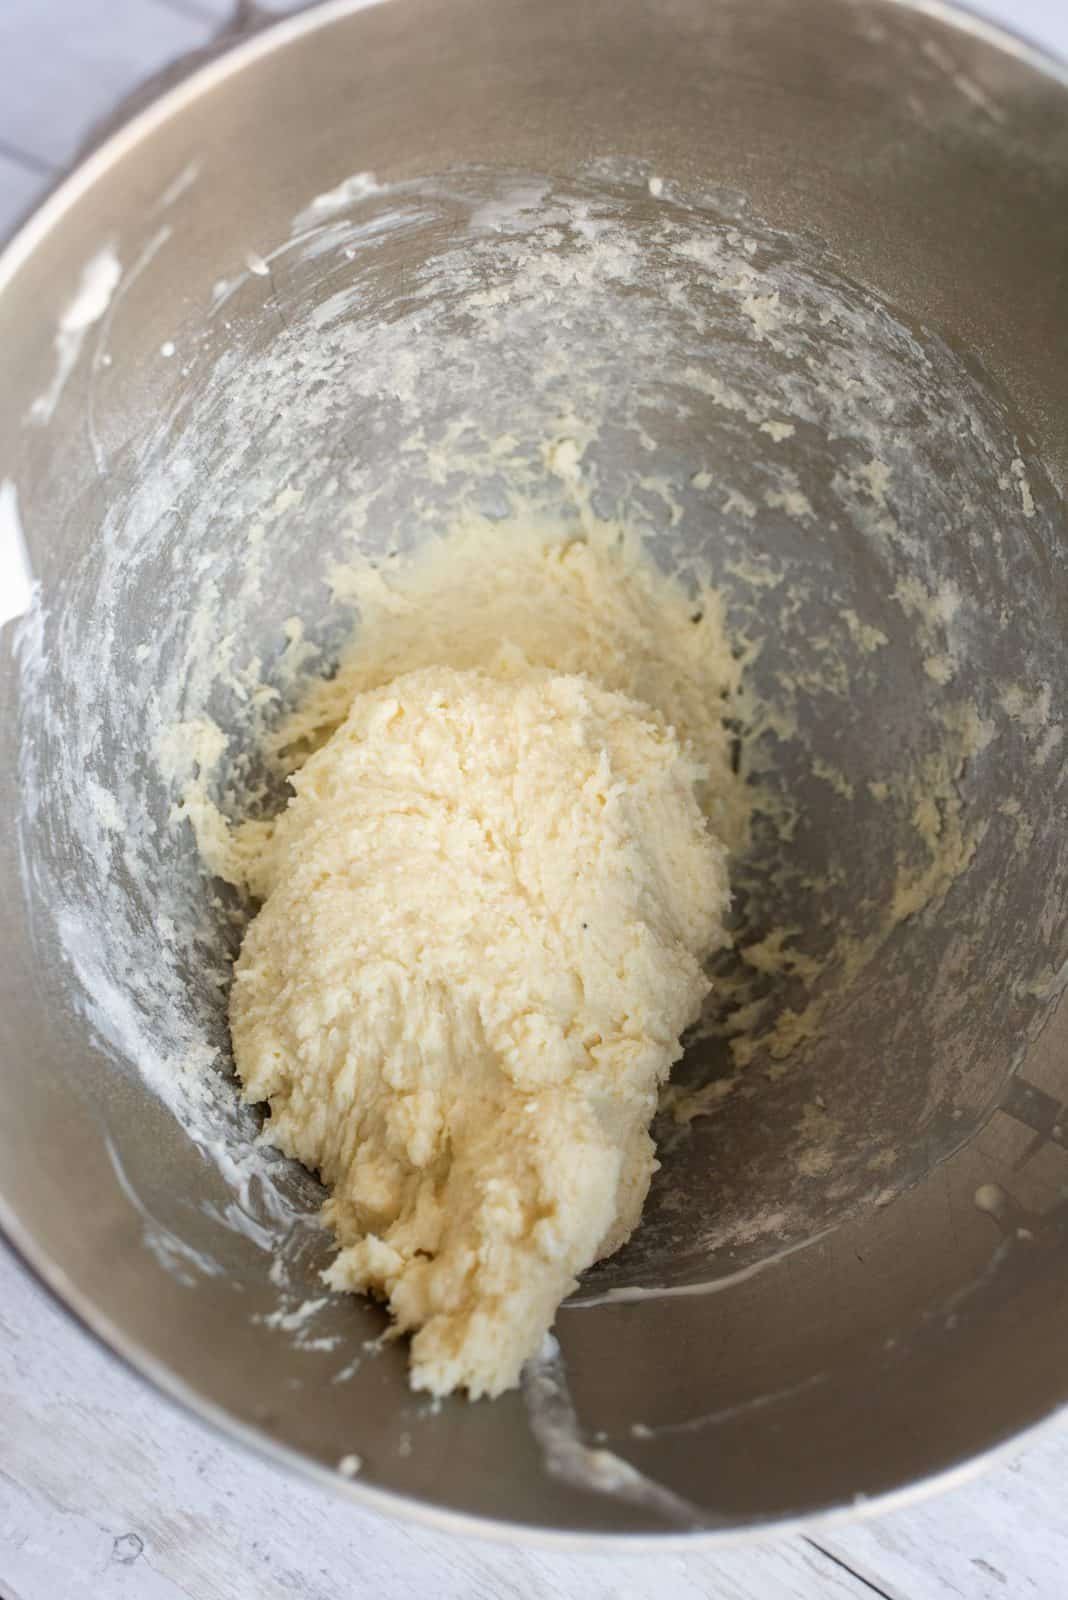 Eggs mixed into butter mixture in bowl of stand mixer.